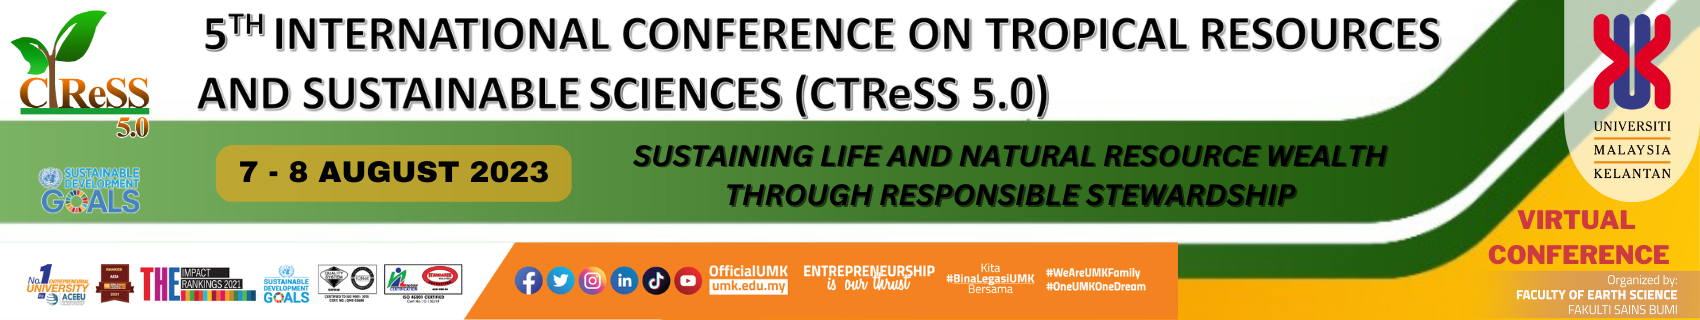 5th International Conference on Tropical Resources and Sustainable Sciences  (CTReSS 5.0)